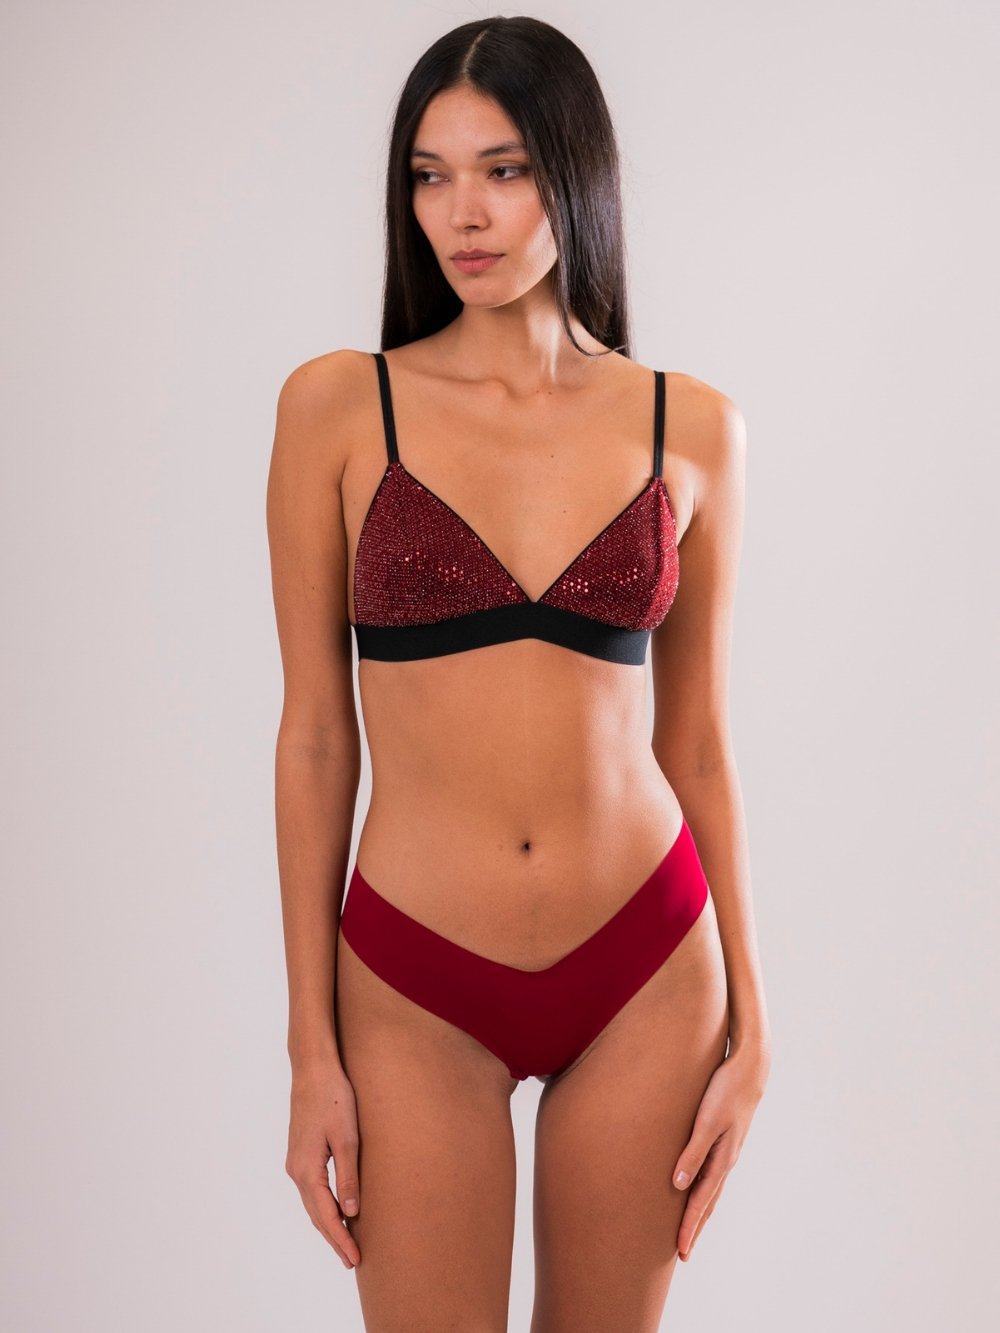 Red Glitter Bra - Caramì Underwear and luxury lingerie made in Italy –  Carami